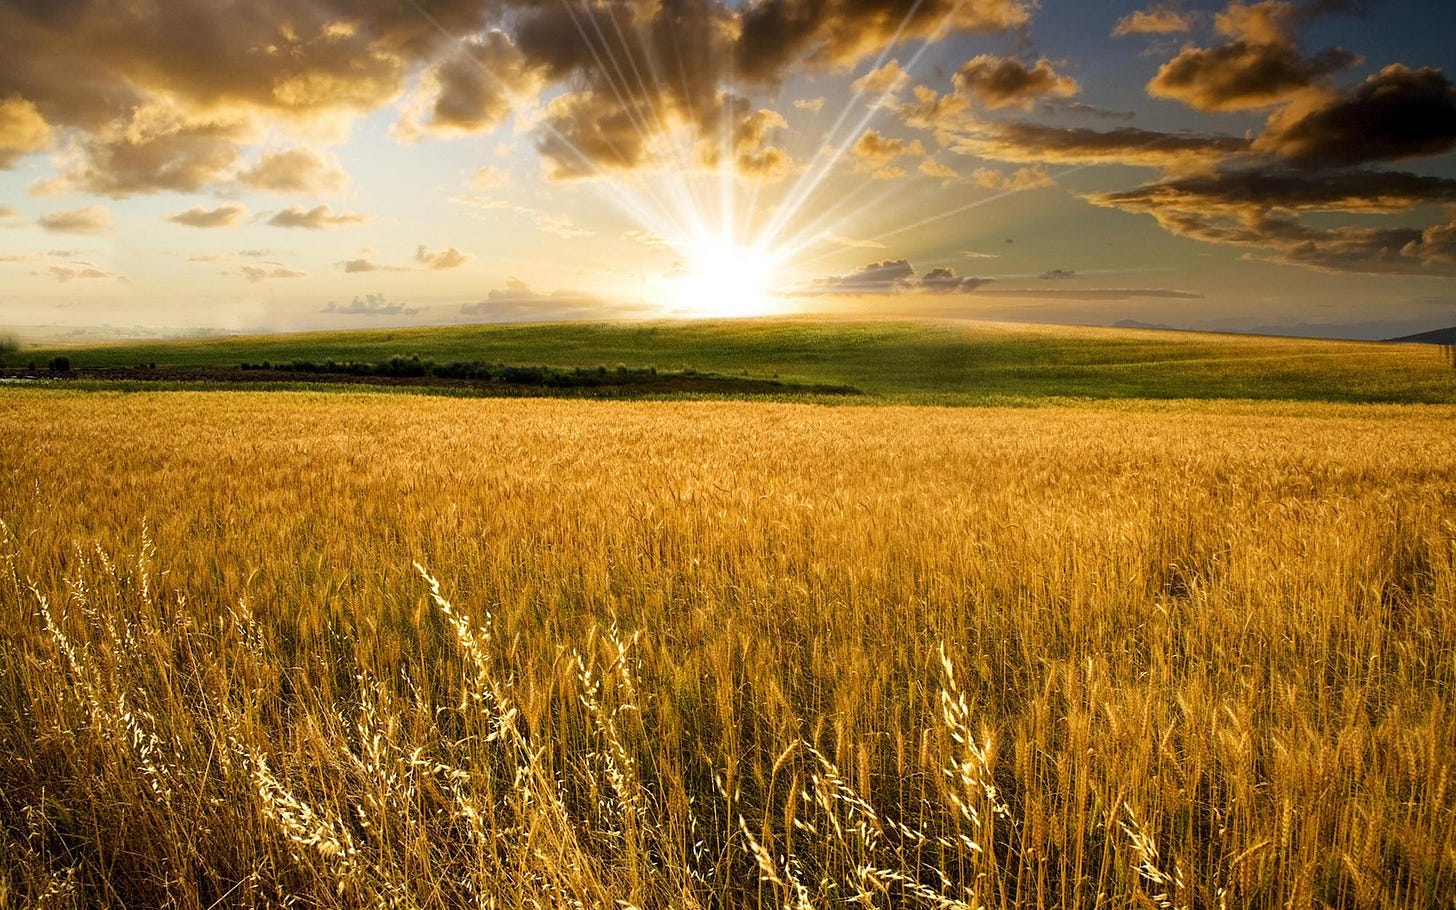 Stunning photo of a field of golden wheat at sunset, late rays breaking over the horizon..